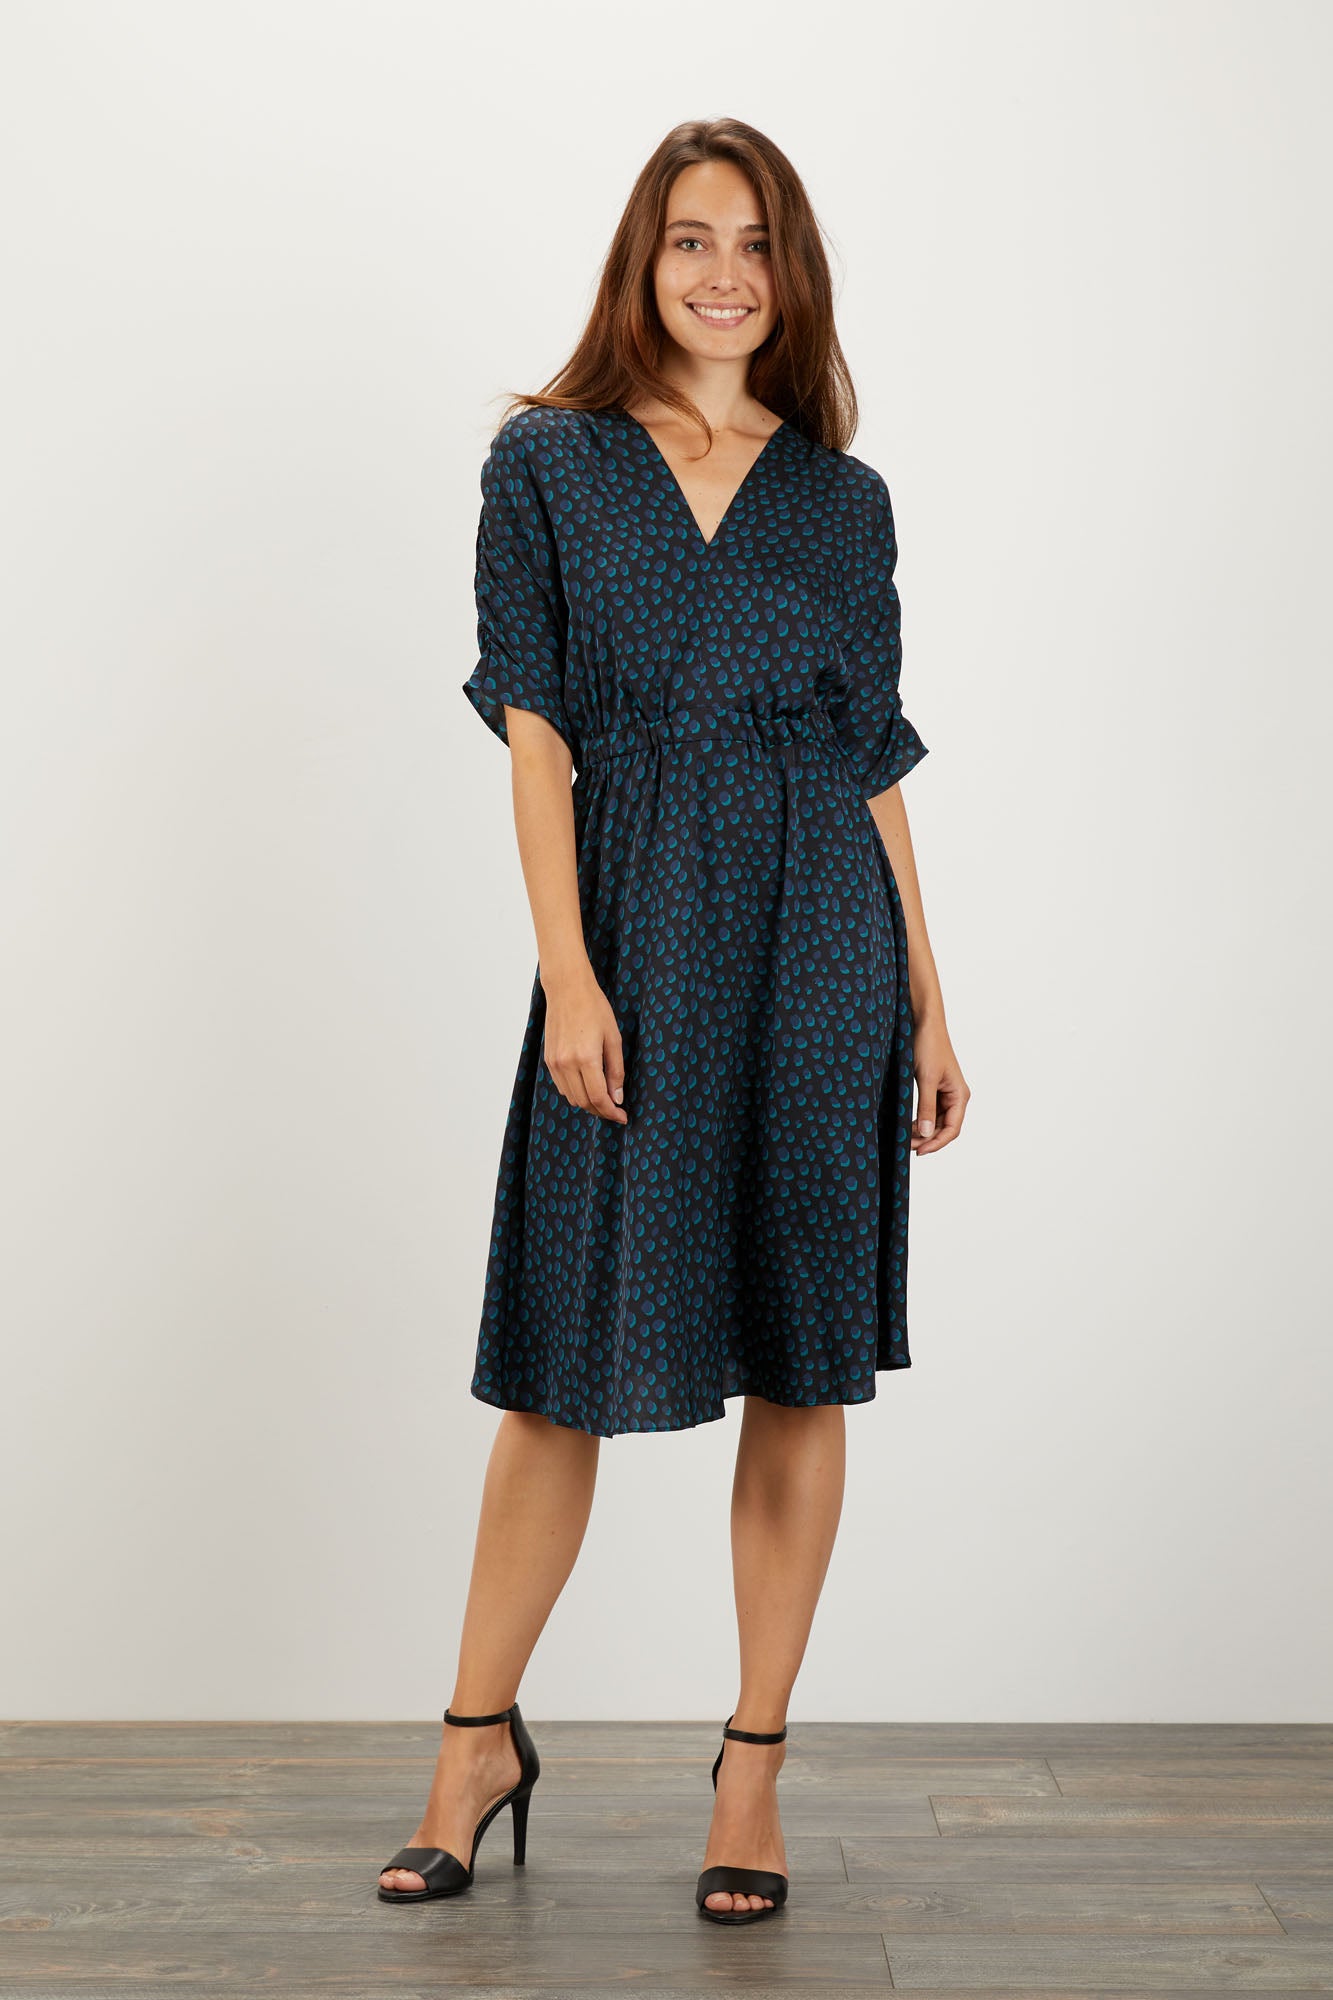 Silk Dresses | Prints for every woman - Tucker